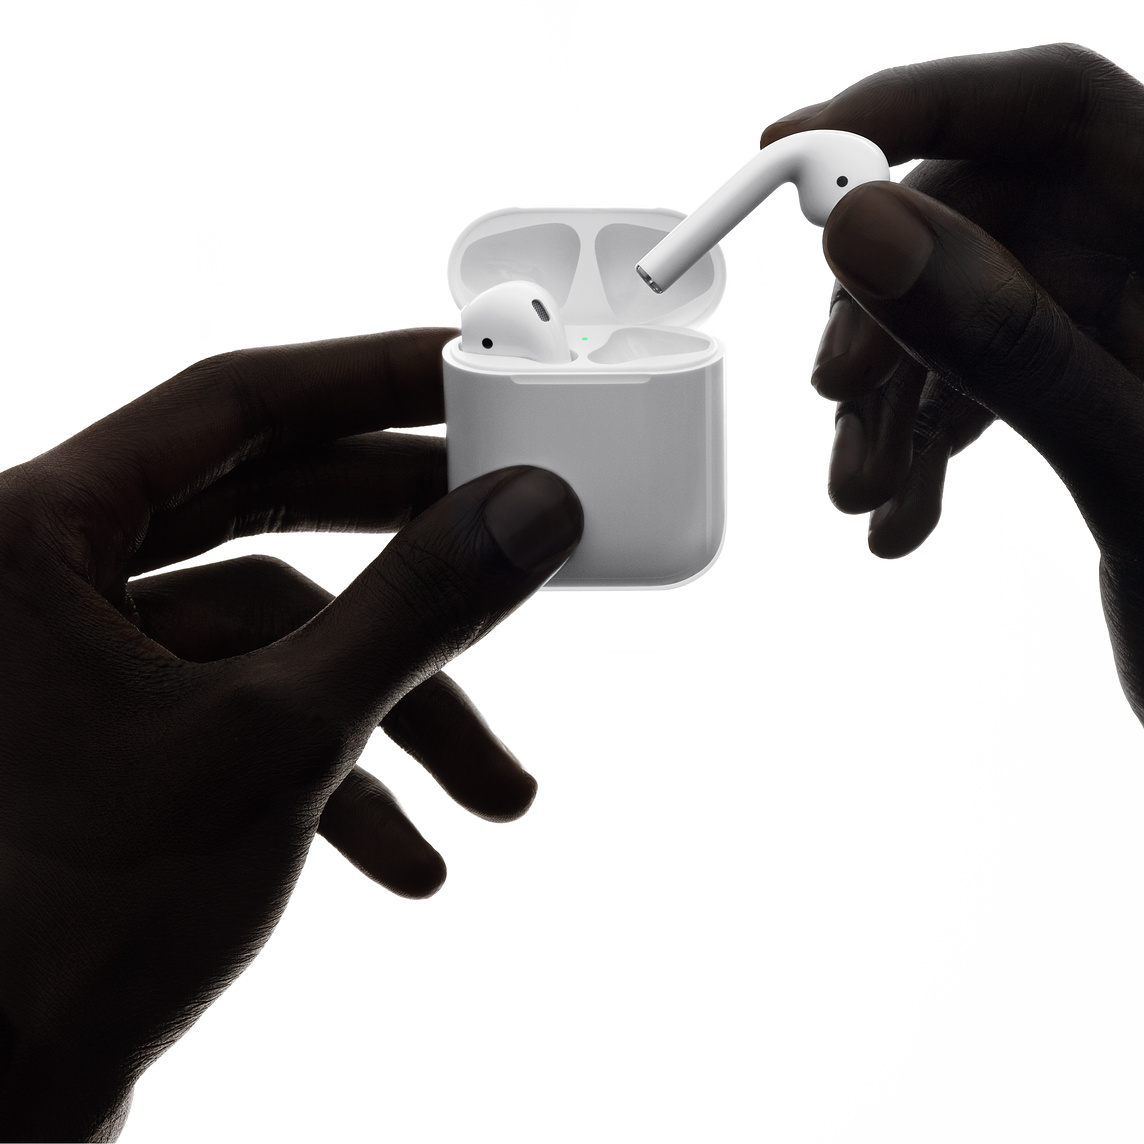 Airpods Tech Gifts for Apple Users - 2018 Holidays